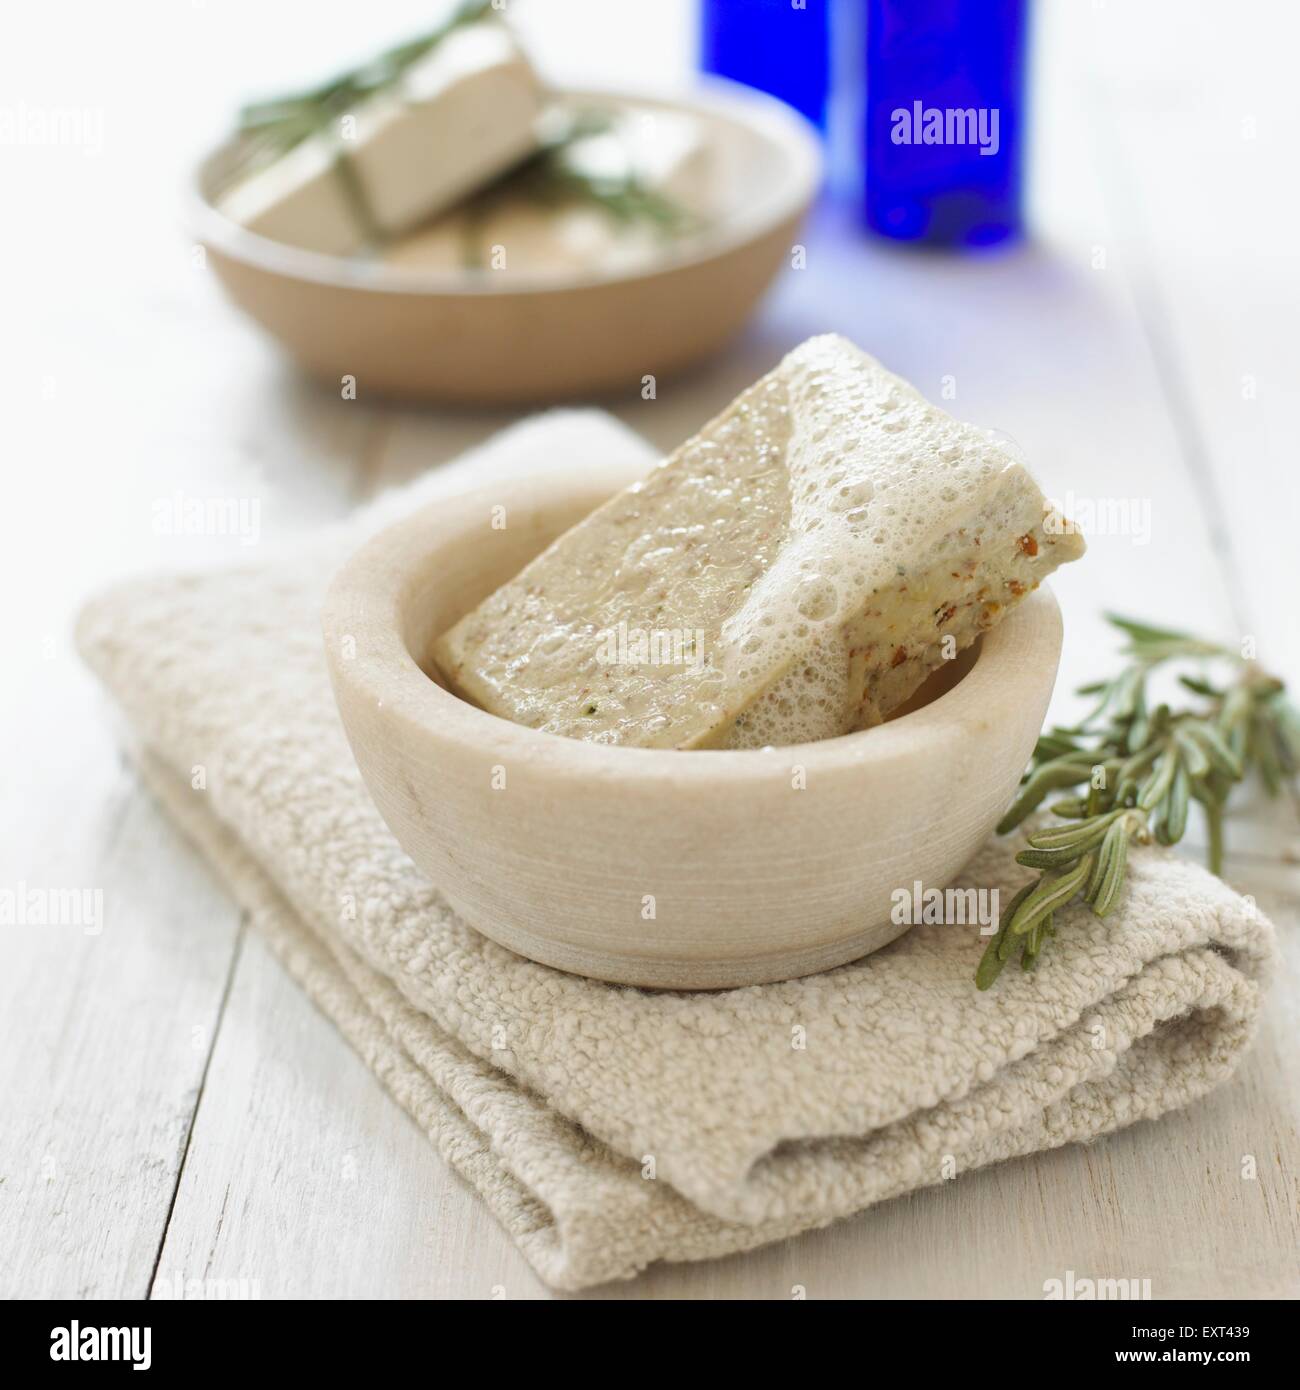 Rosemary soap in a bowl, folded towel underneath and a fresh sprig of rosemary nearby Stock Photo